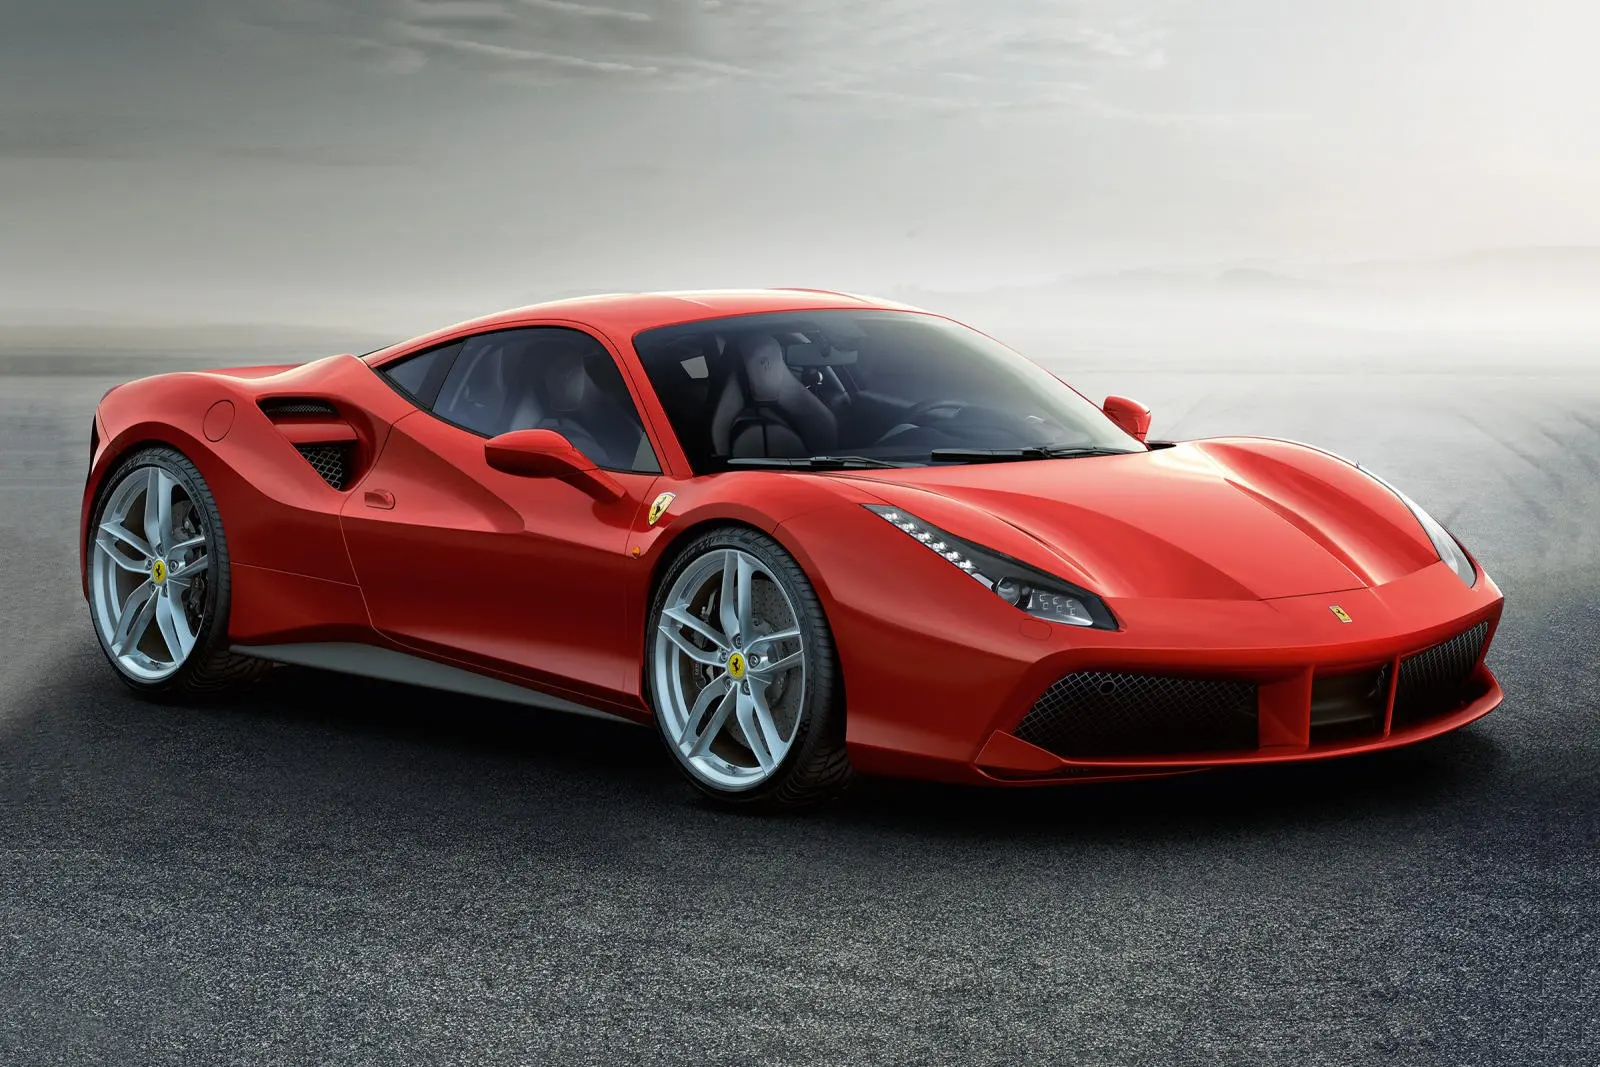 ferrari 488 spider cost in usa - How much does a Ferrari 488 Spider cost